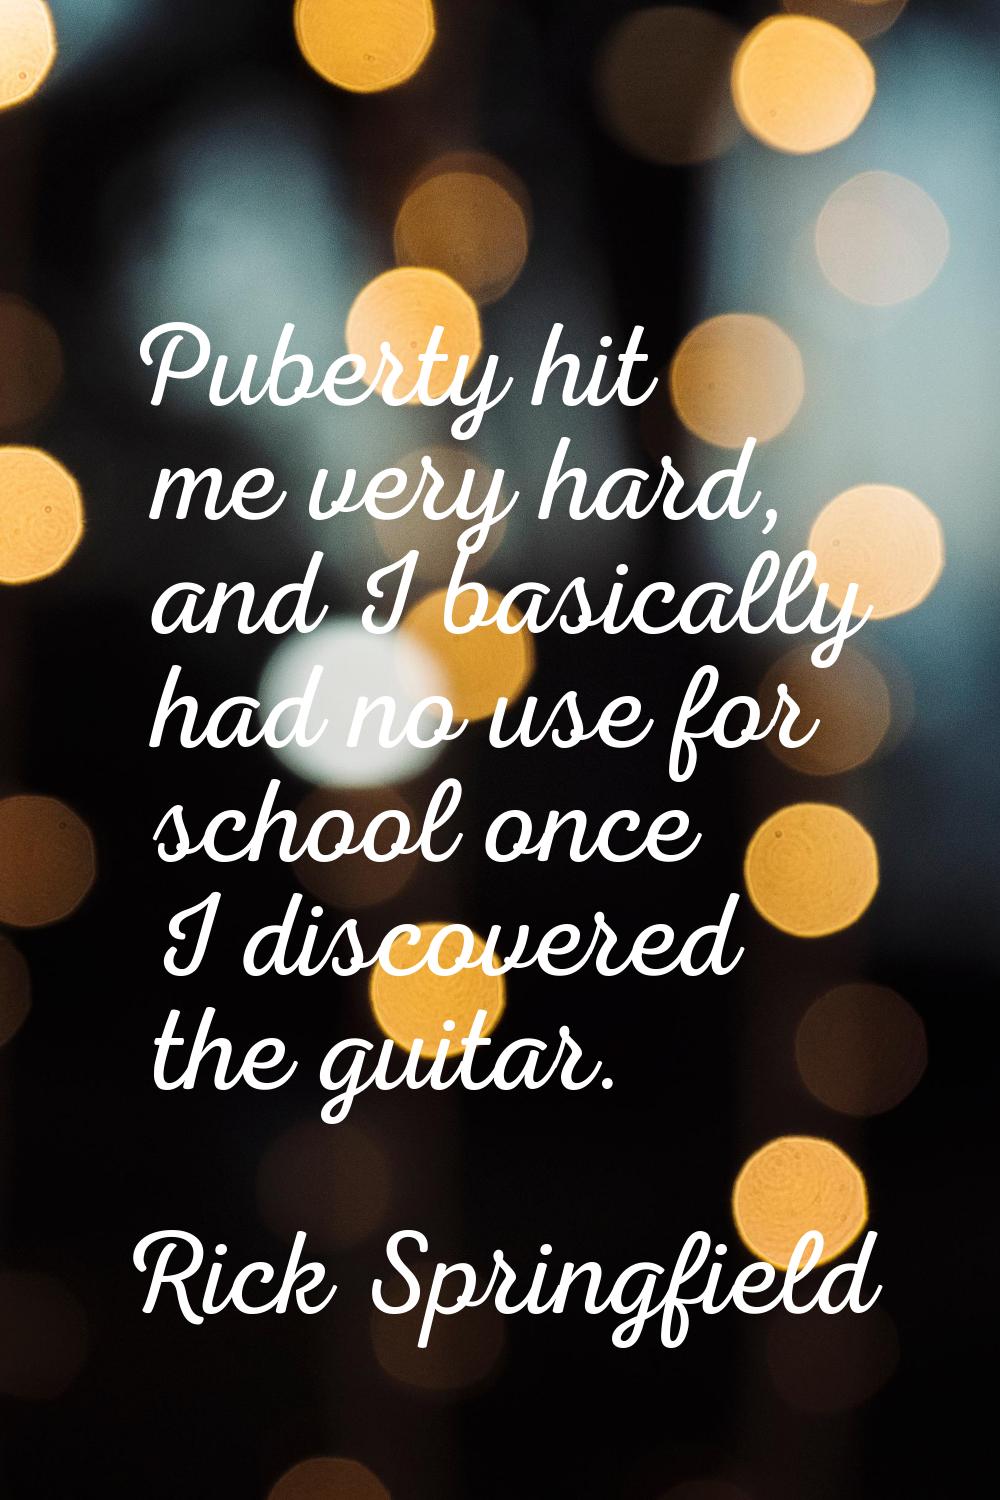 Puberty hit me very hard, and I basically had no use for school once I discovered the guitar.